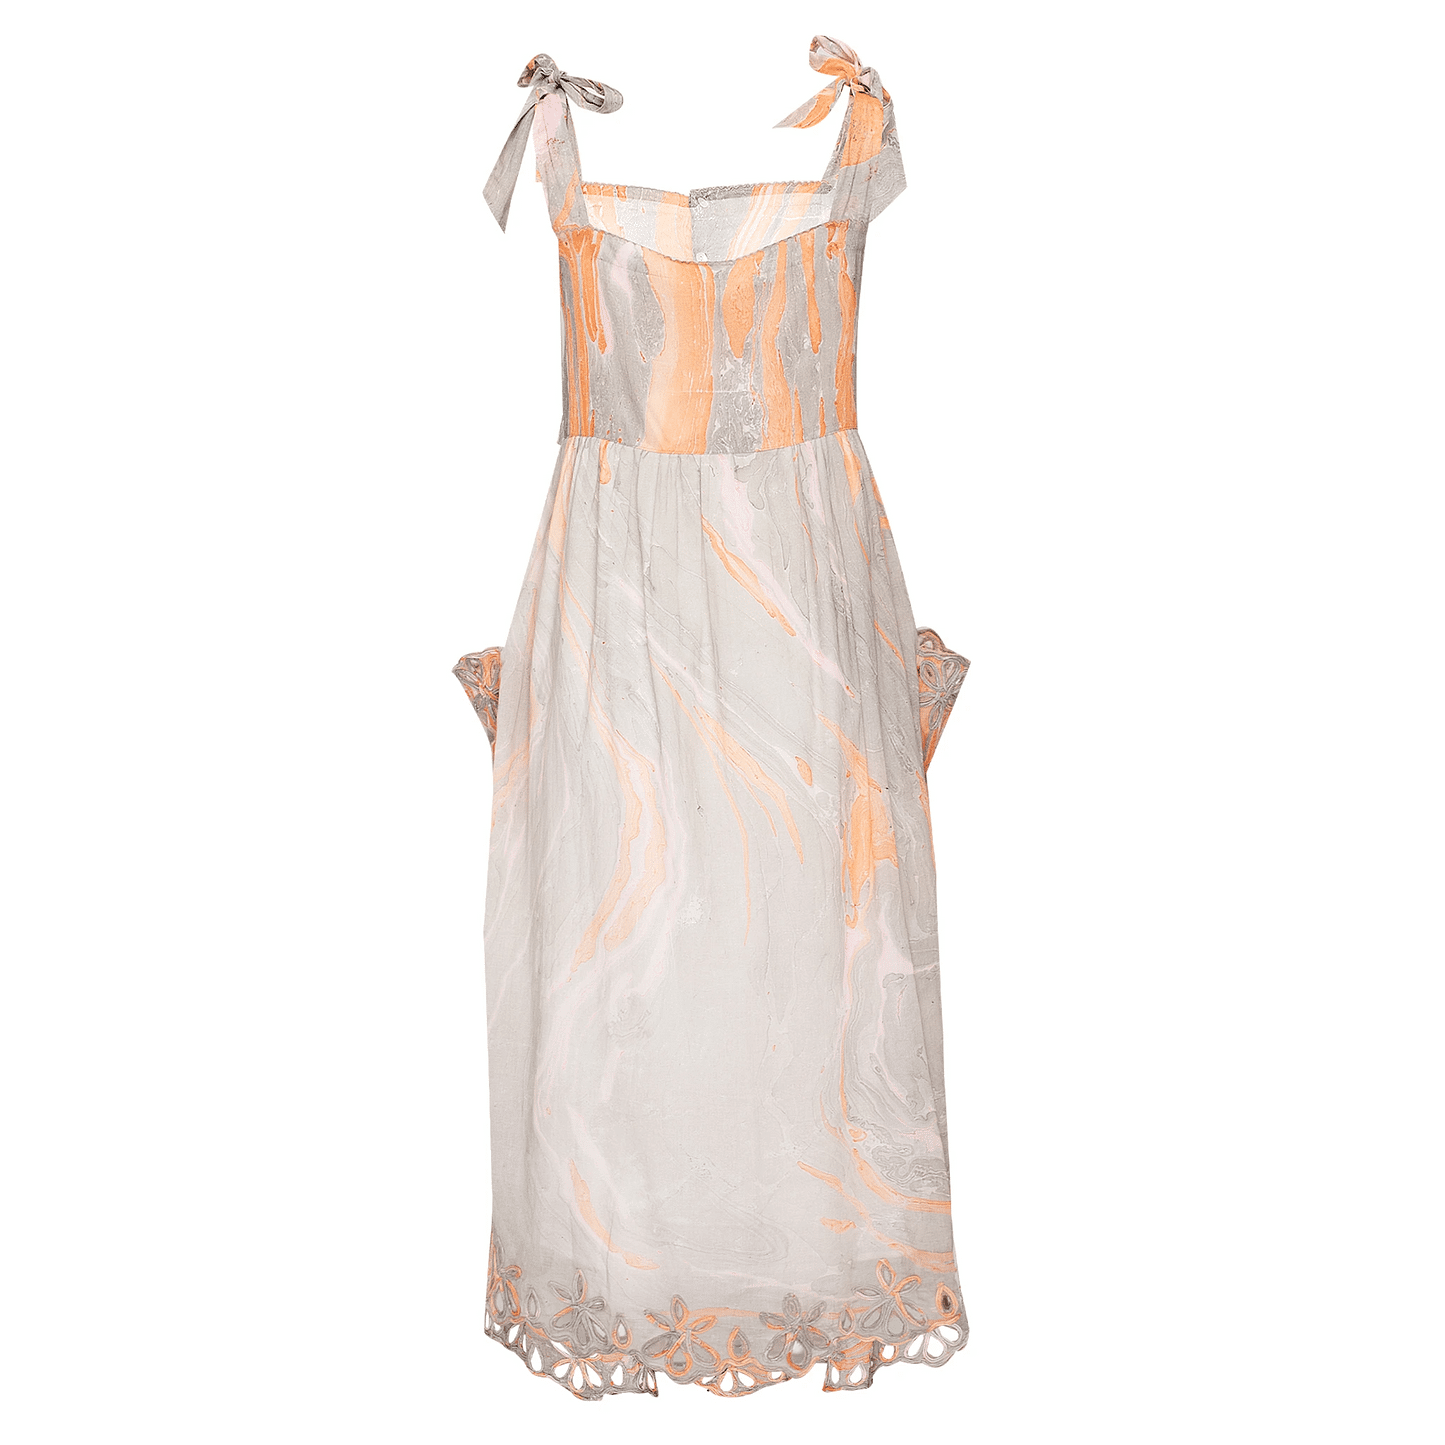 Marble Print Tie Shoulder Dress w/cut out Embro Pink/Peach